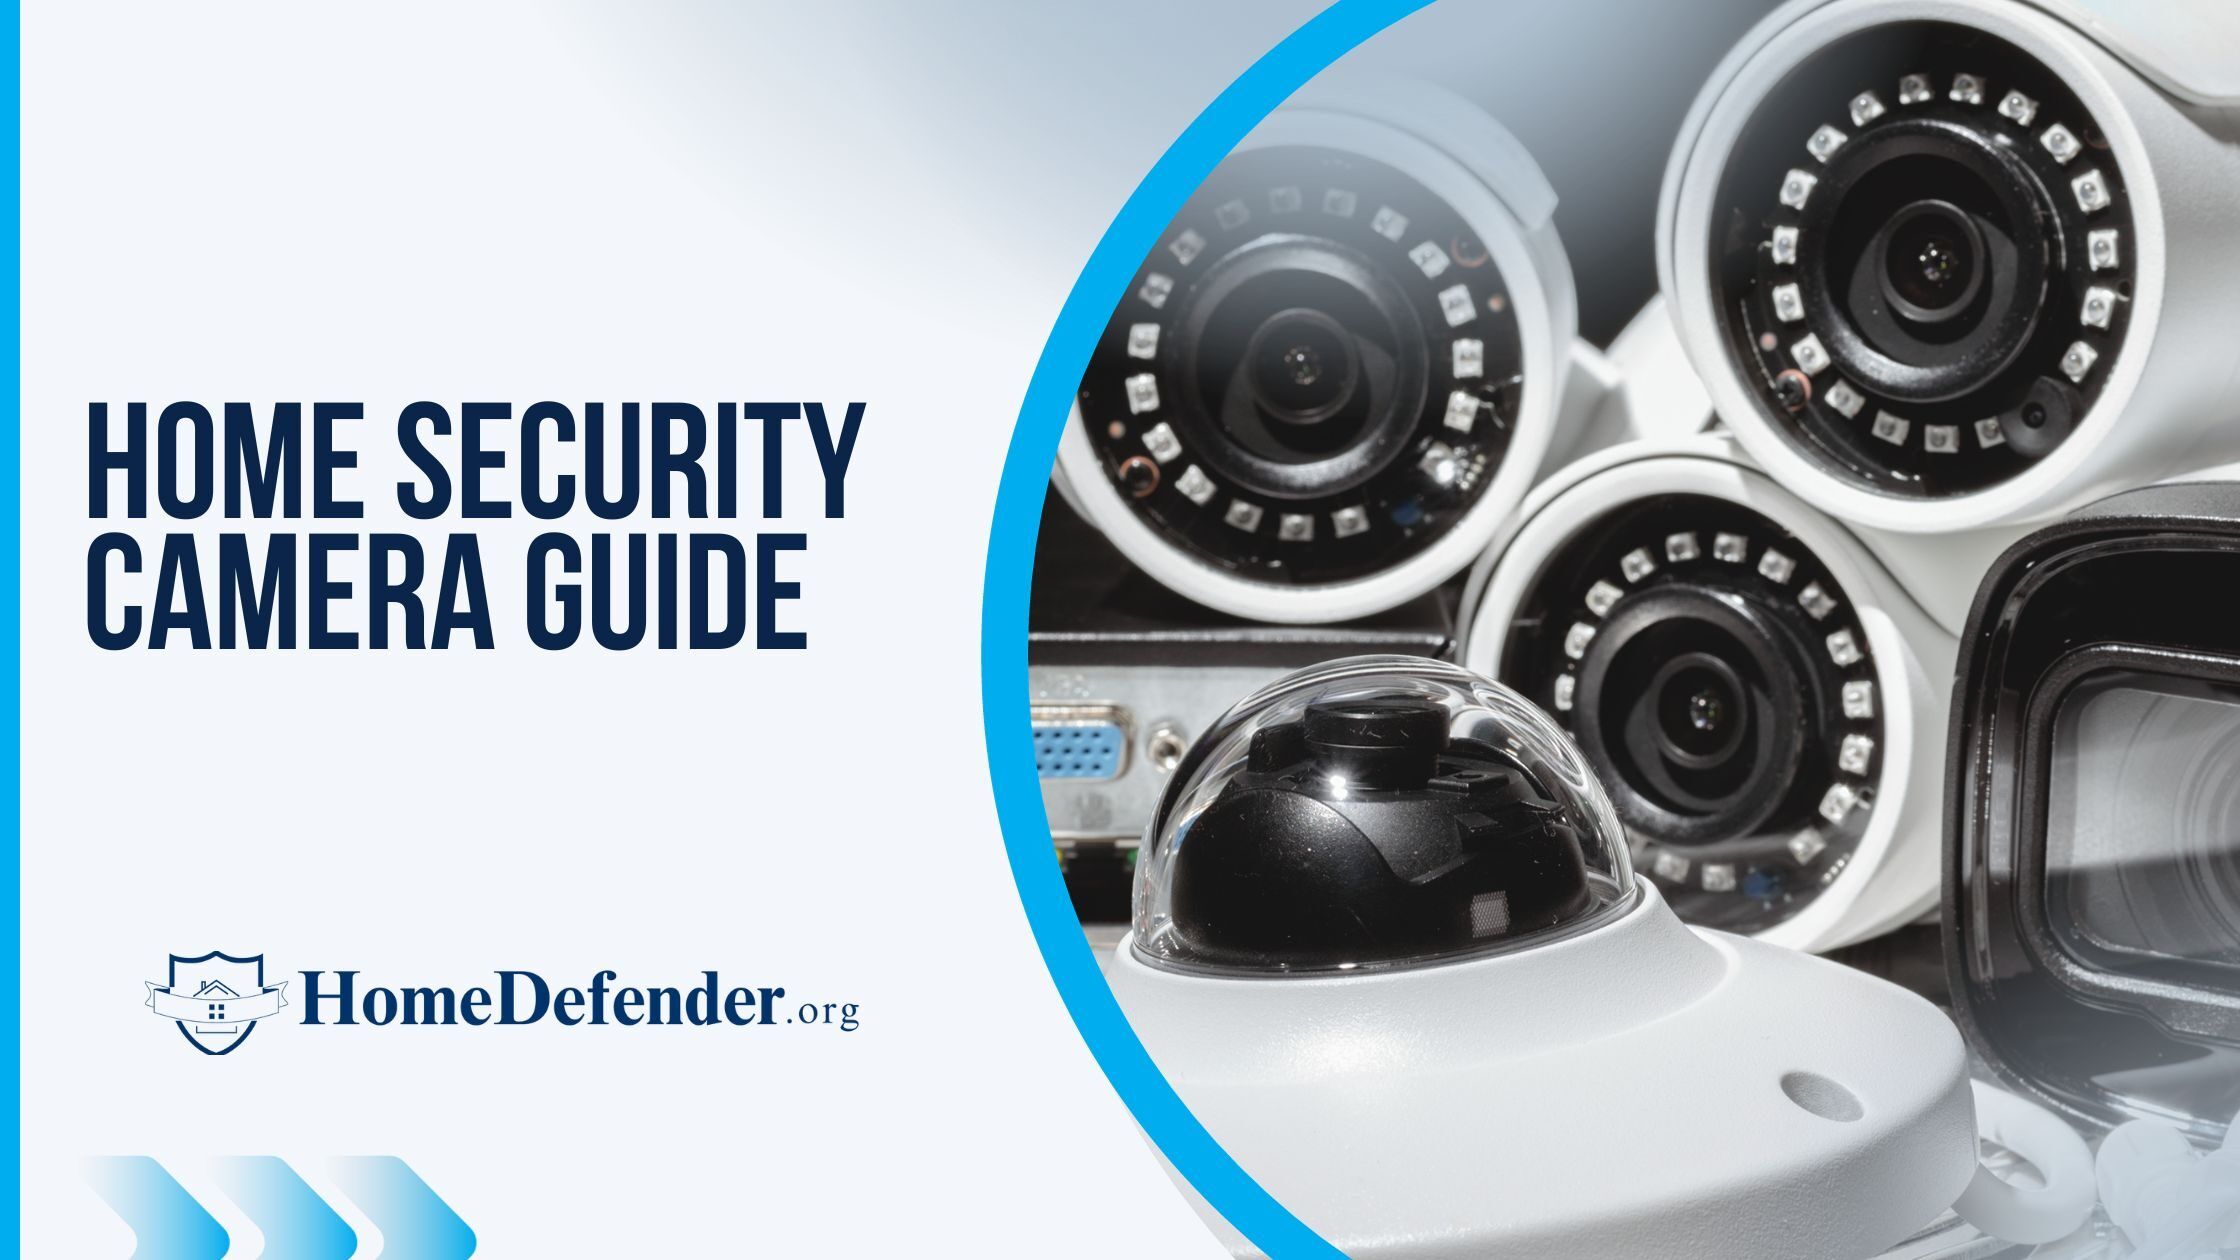 Home Security Camera Guide: How to Choose the Right System